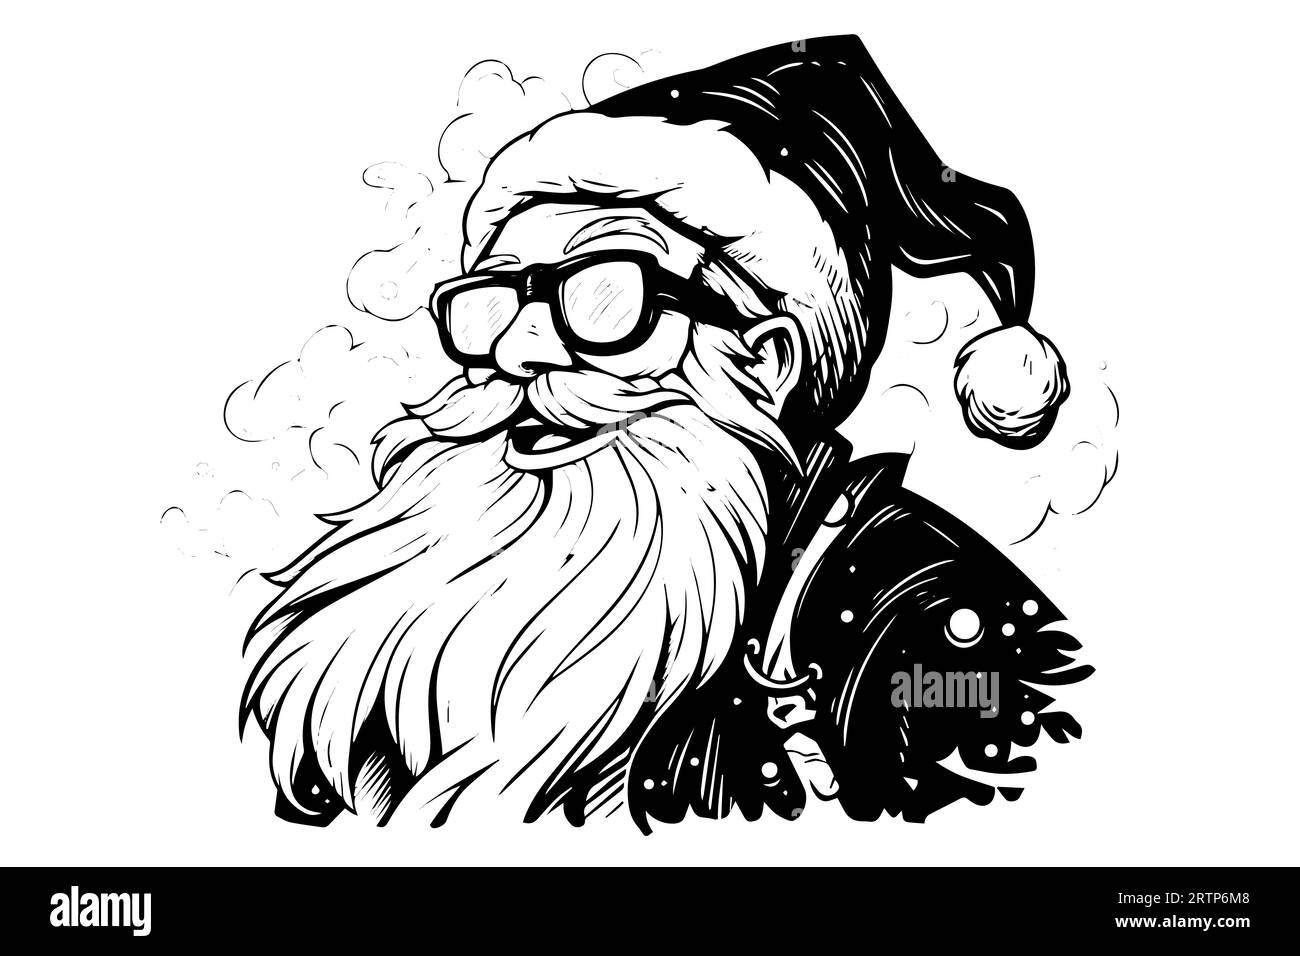 Santa Claus head in a hat sketch hand drawn in engraving style vector illustration. Stock Vector